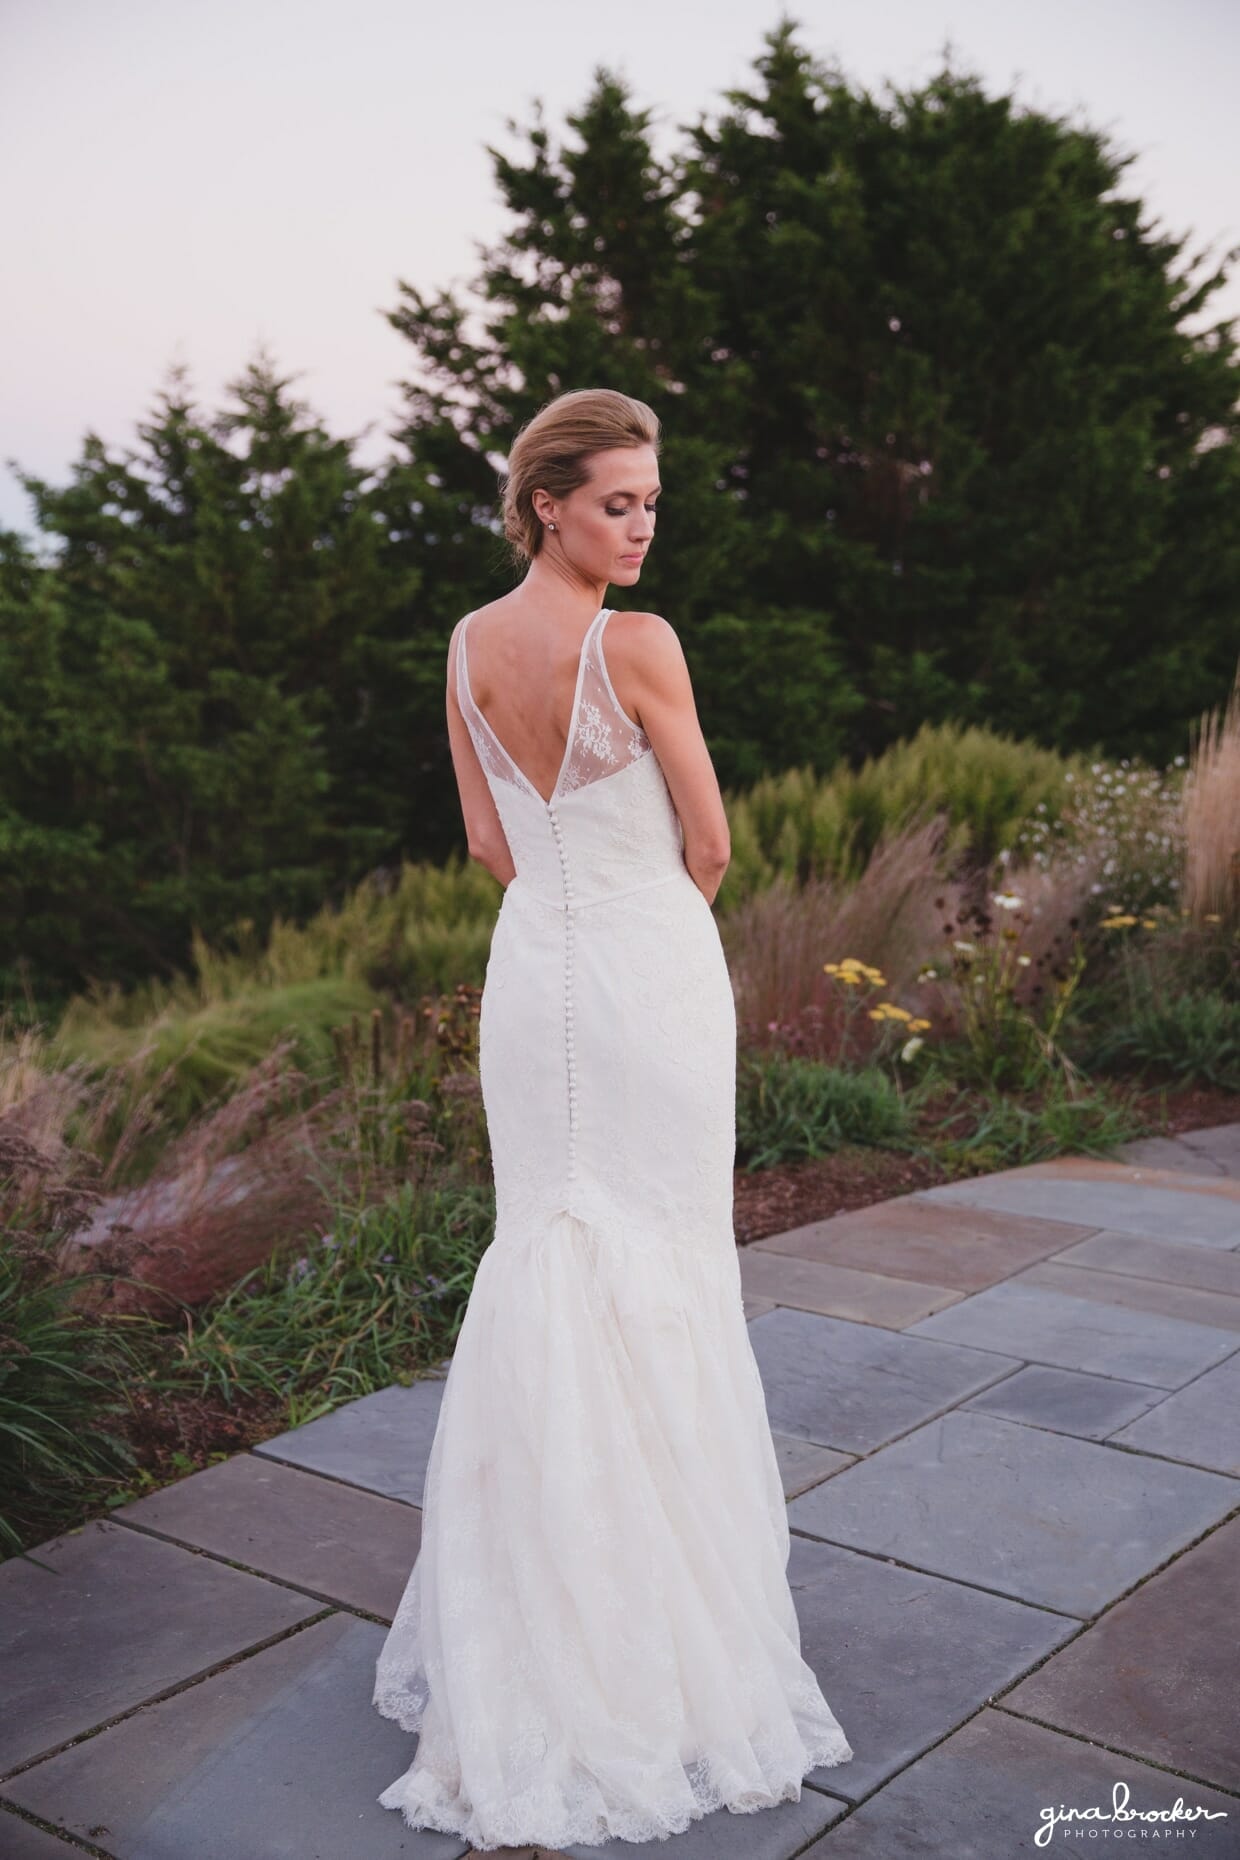 A stunning portrait of a bride at sunset during her Nantucket wedding at the Westmoor Club